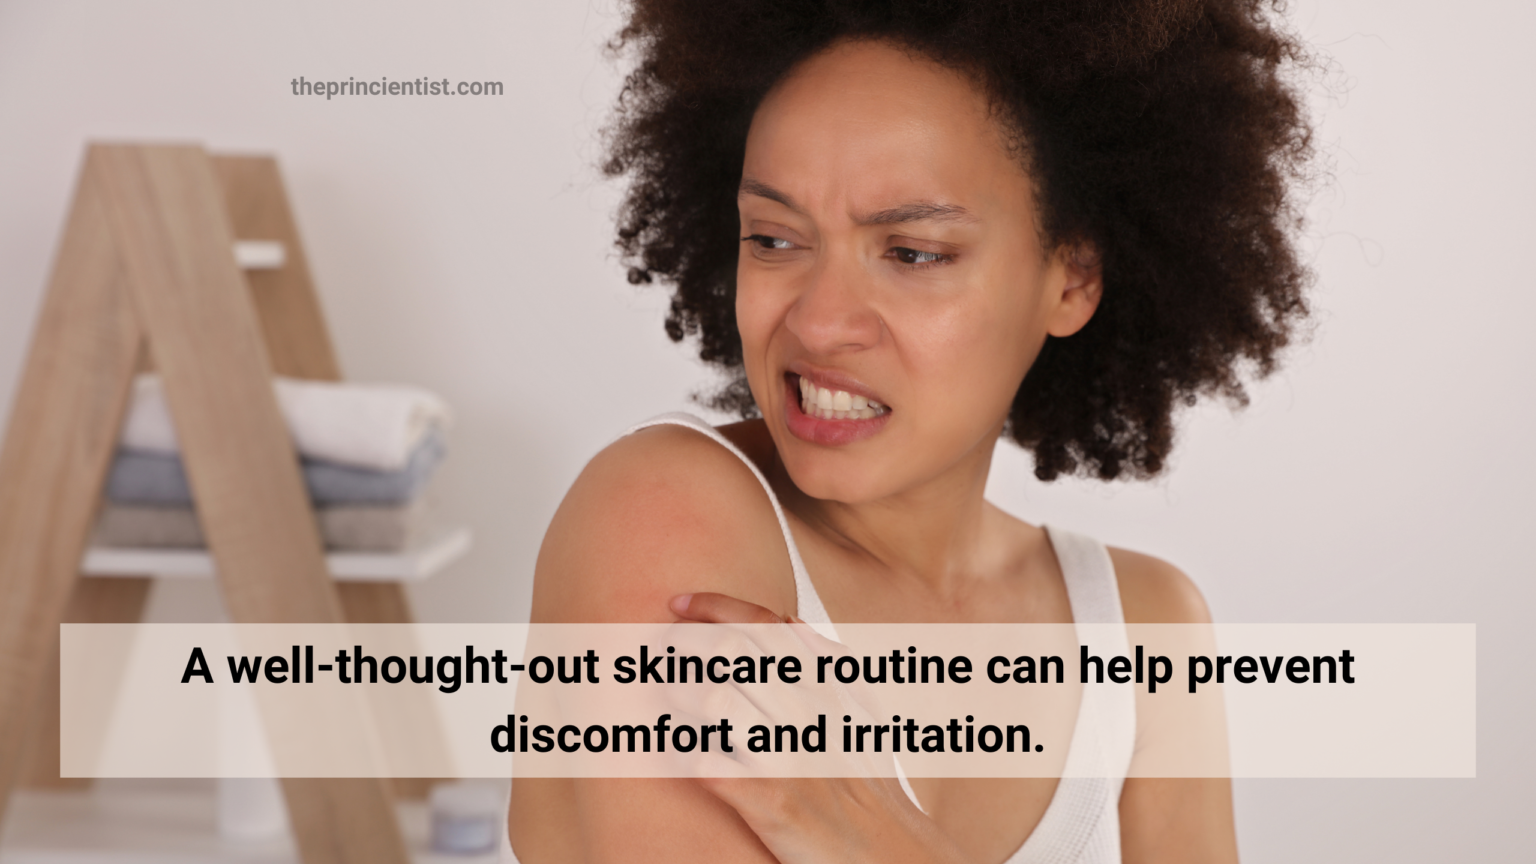 Why is Skincare Important? - The Princientist